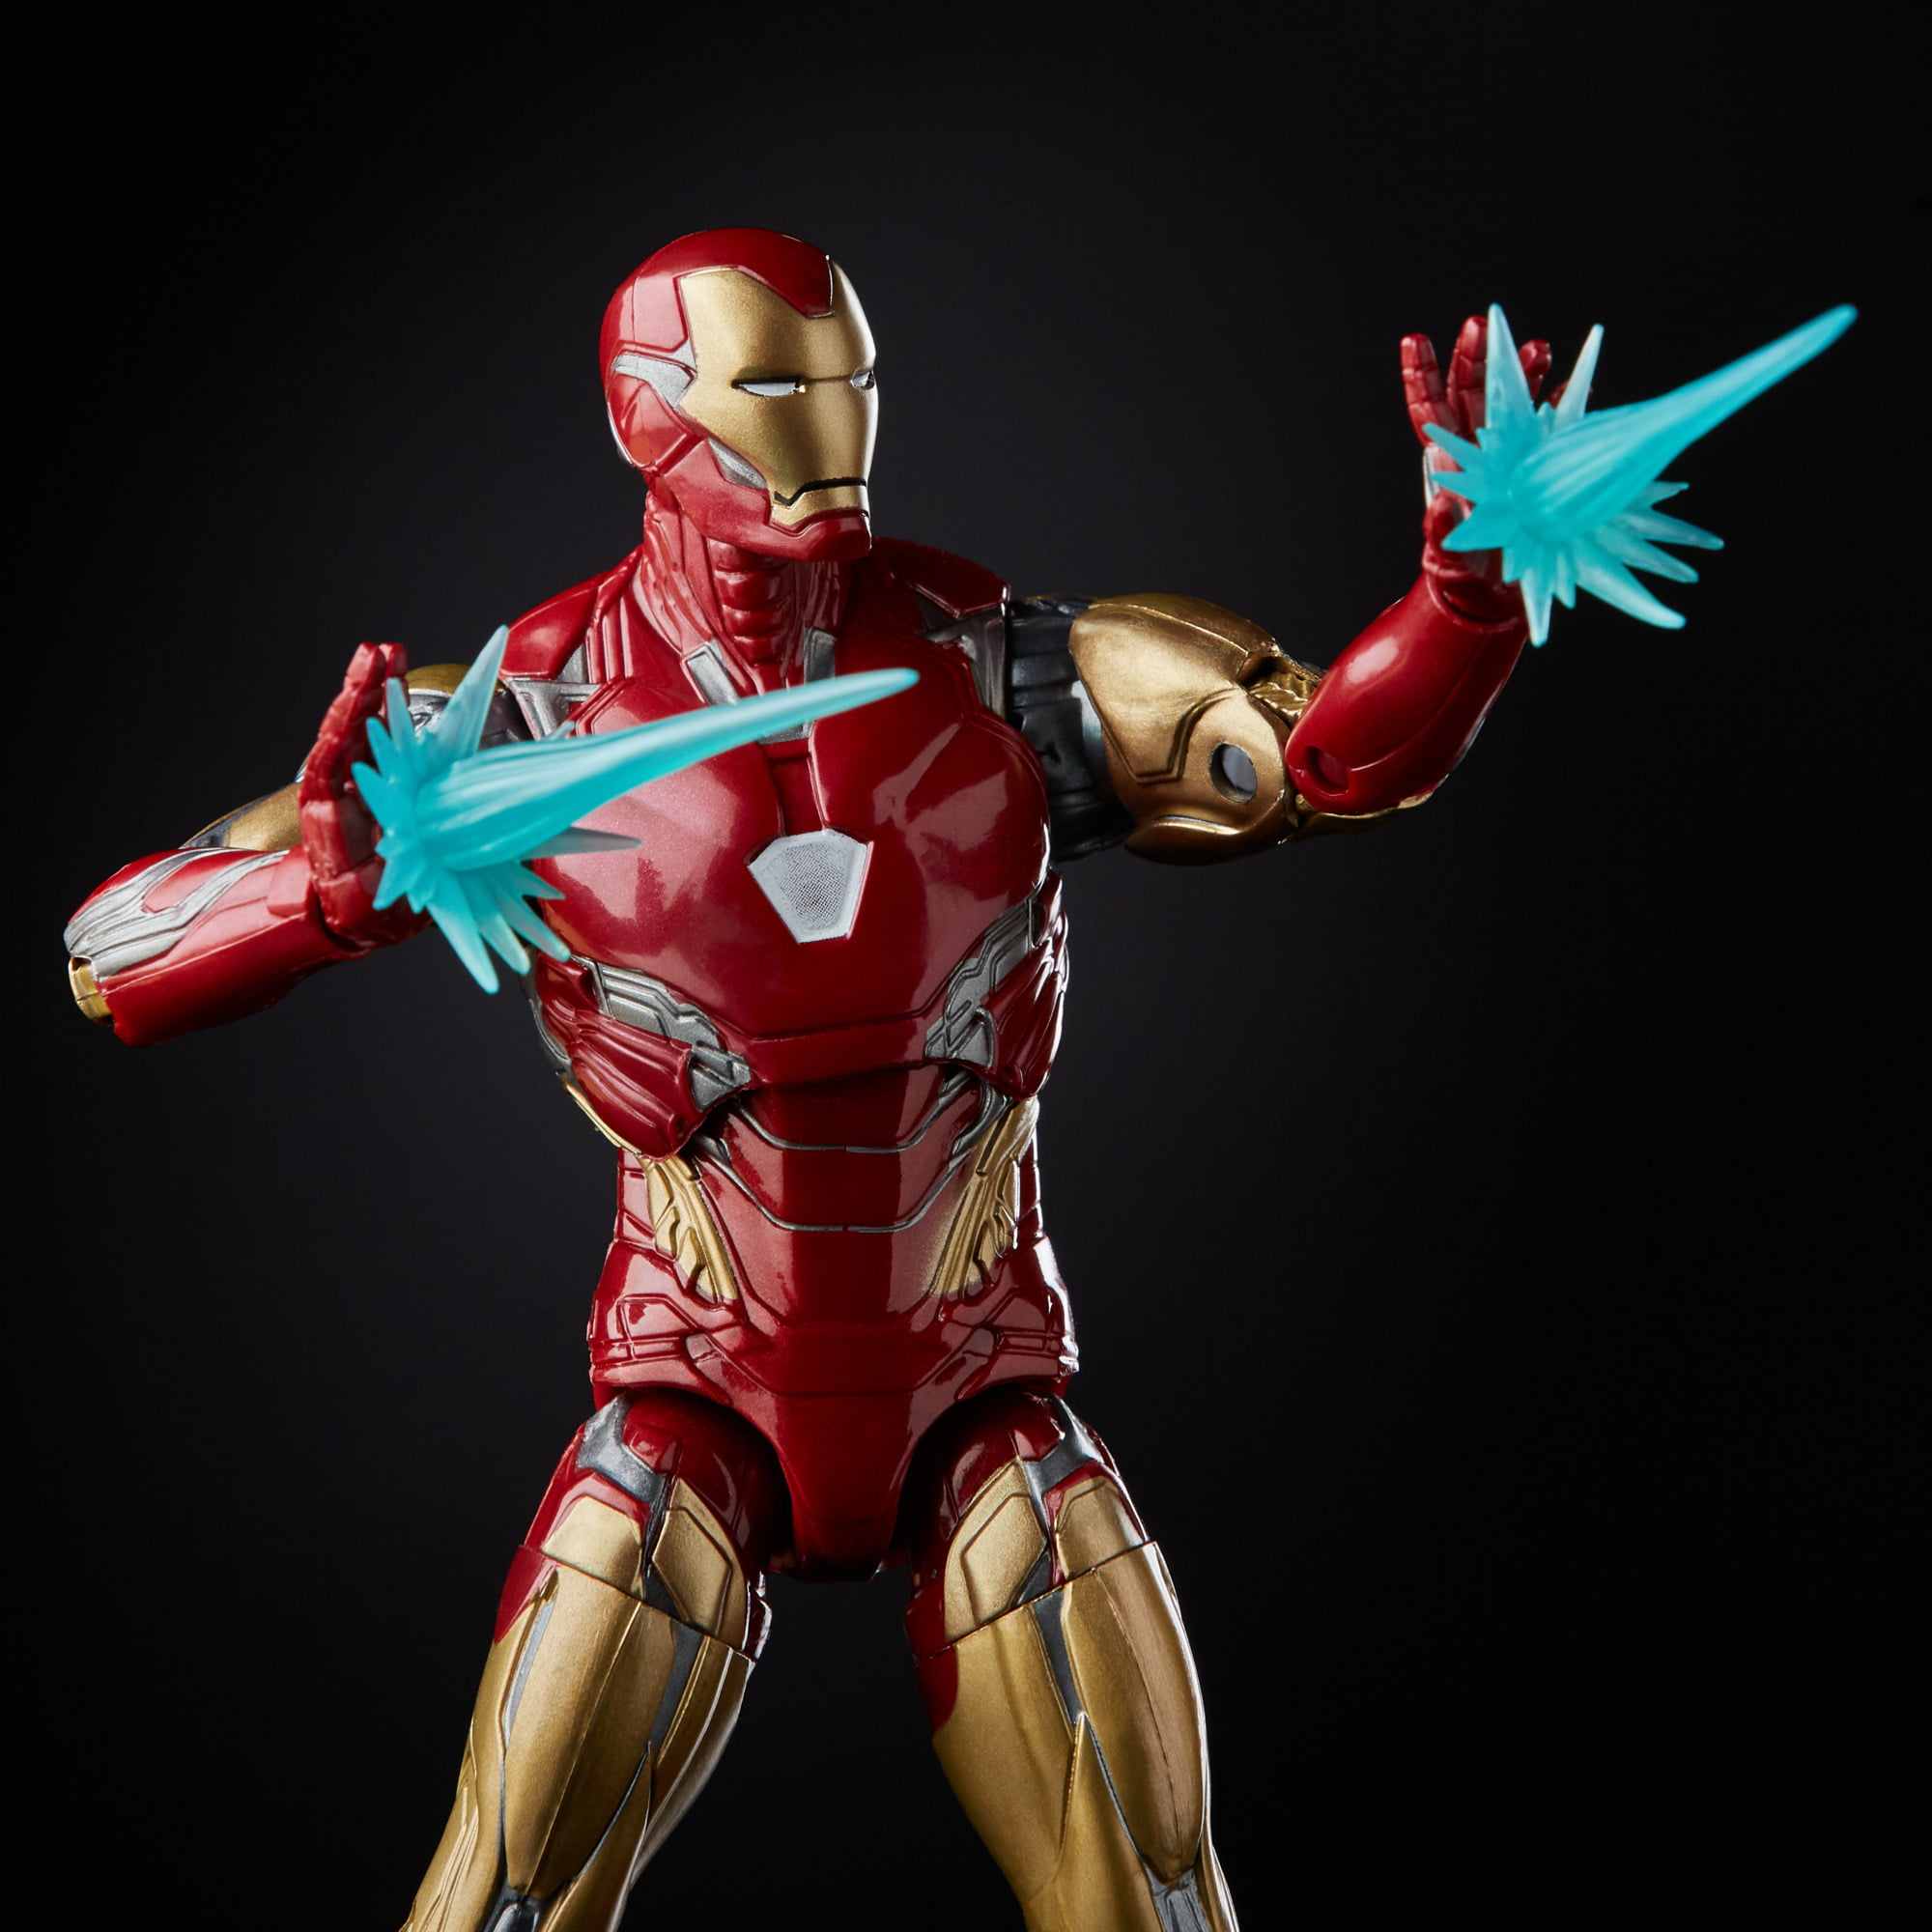 Marvel Legends Iron Man 6" Action Figure Avengers Endgame Movie Toy Collectible 